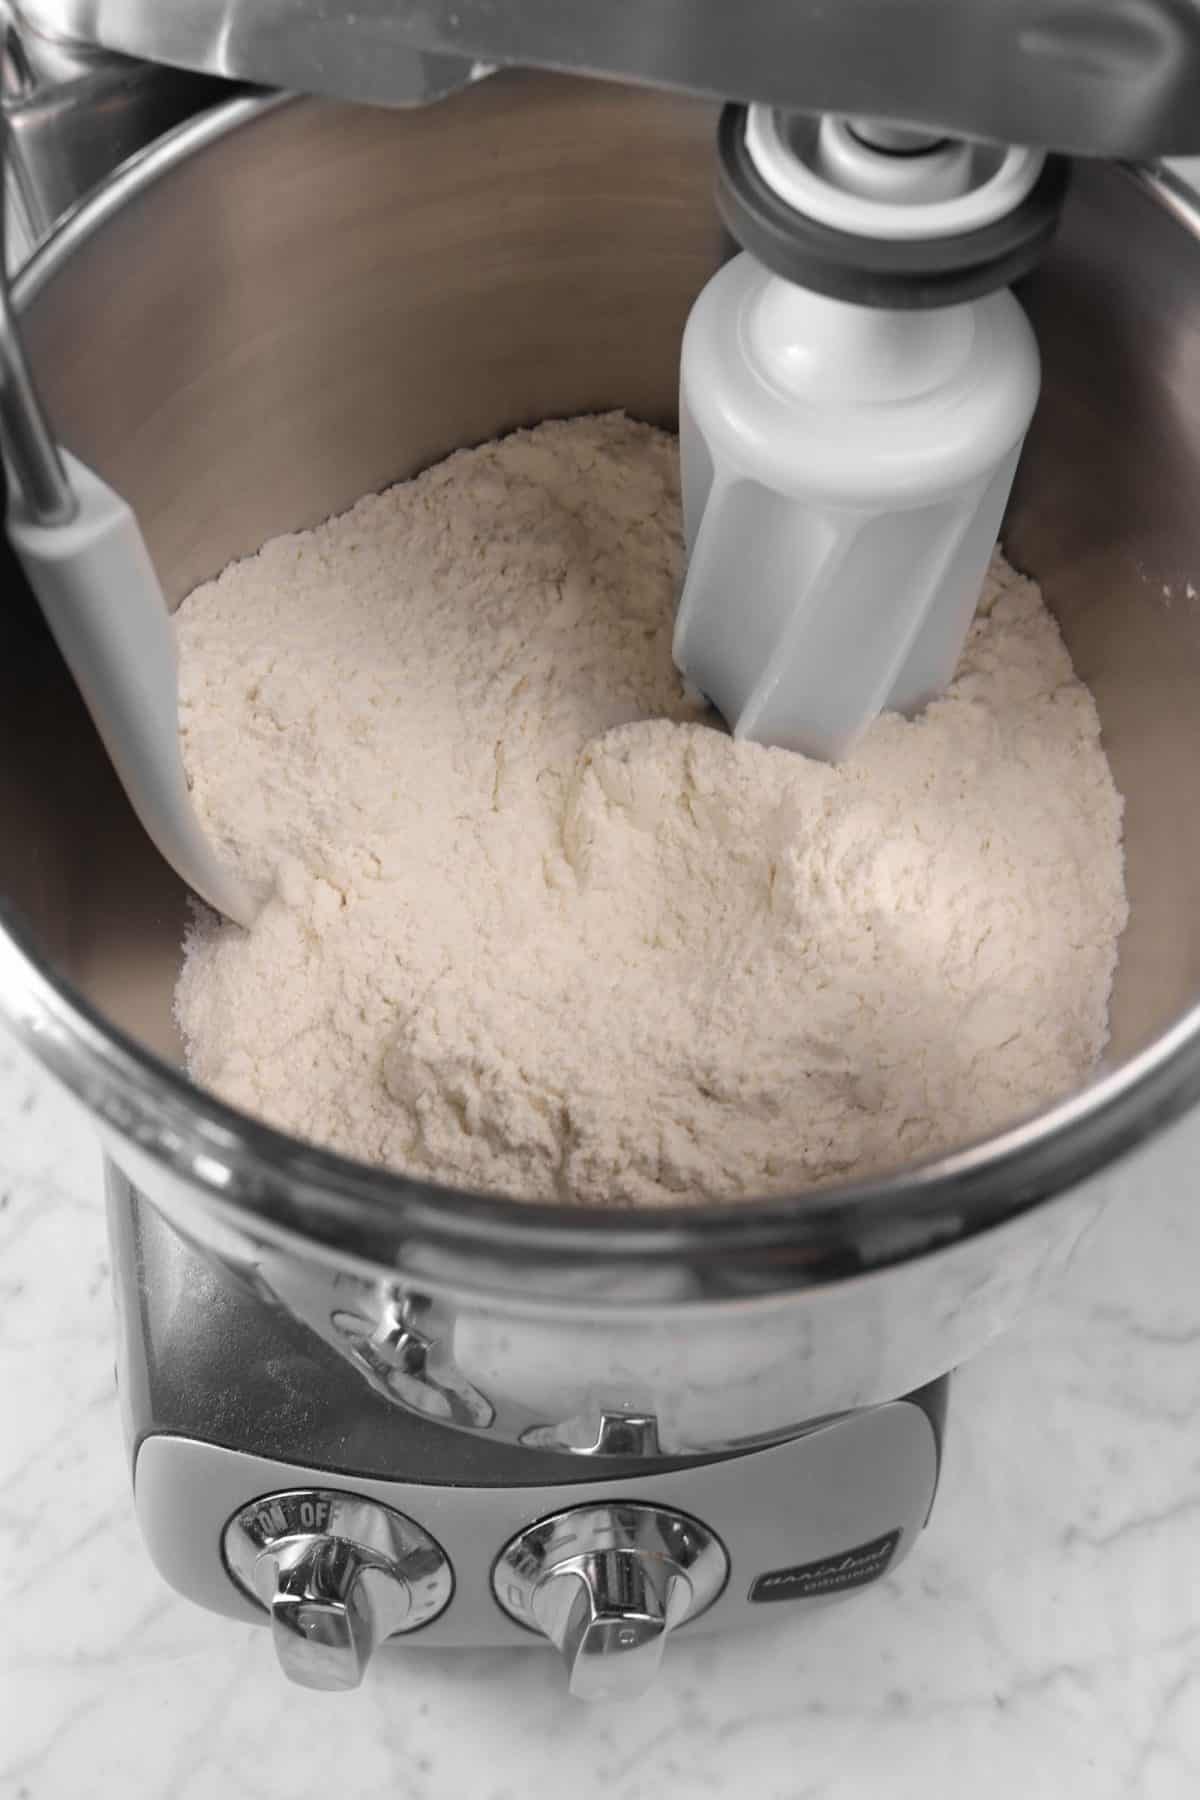 dry ingredients for cinnamon rolls in a mixer